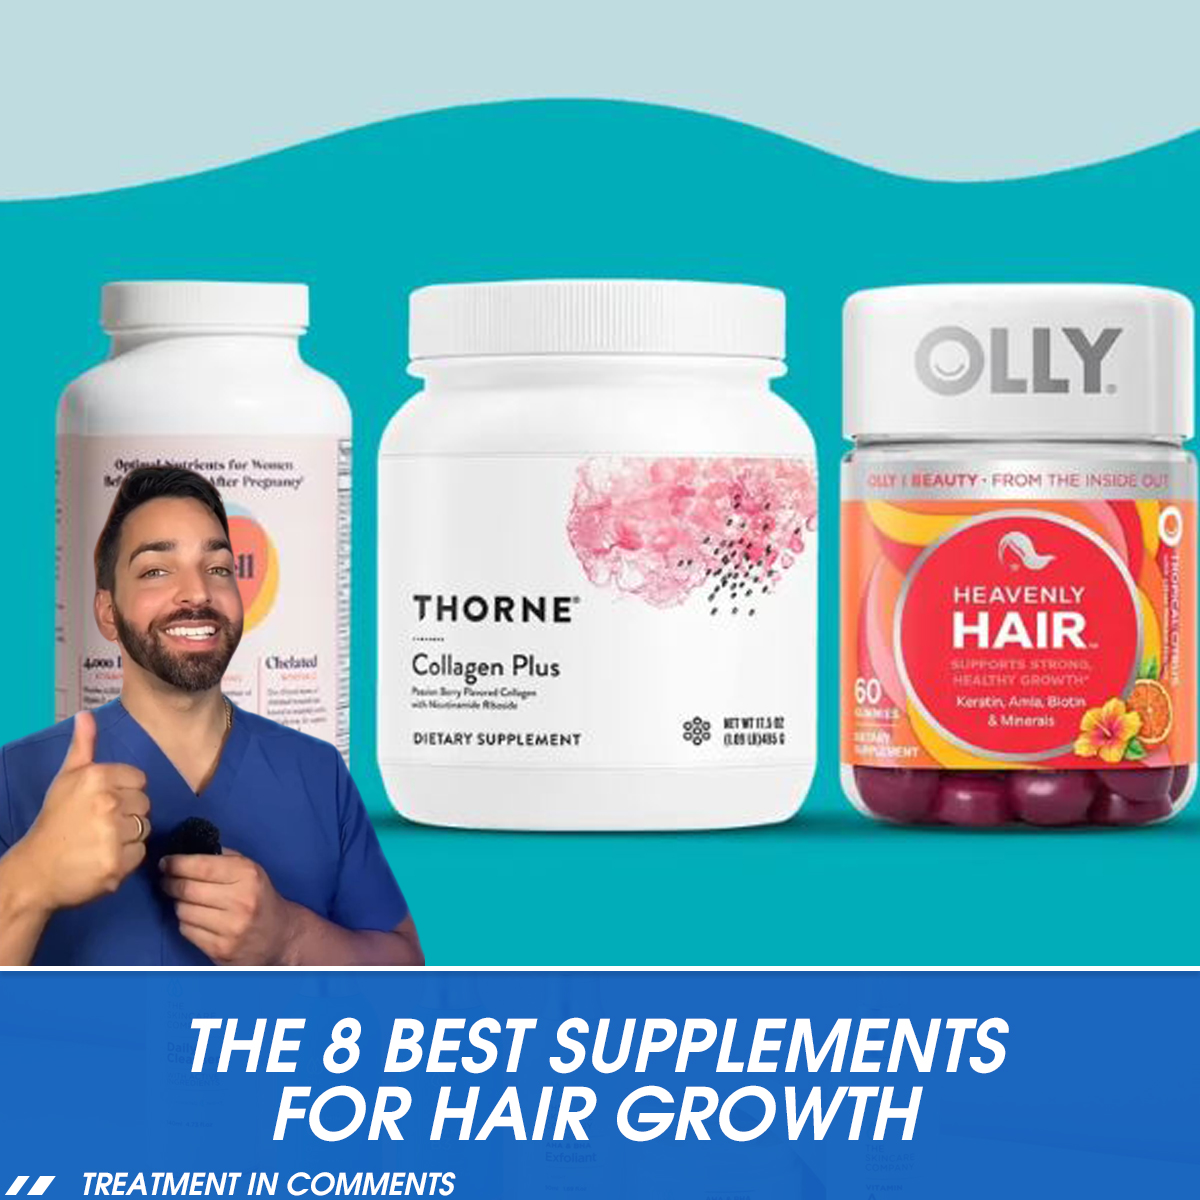 The 8 Best Supplements for Hair Growth, According to a Dietitian